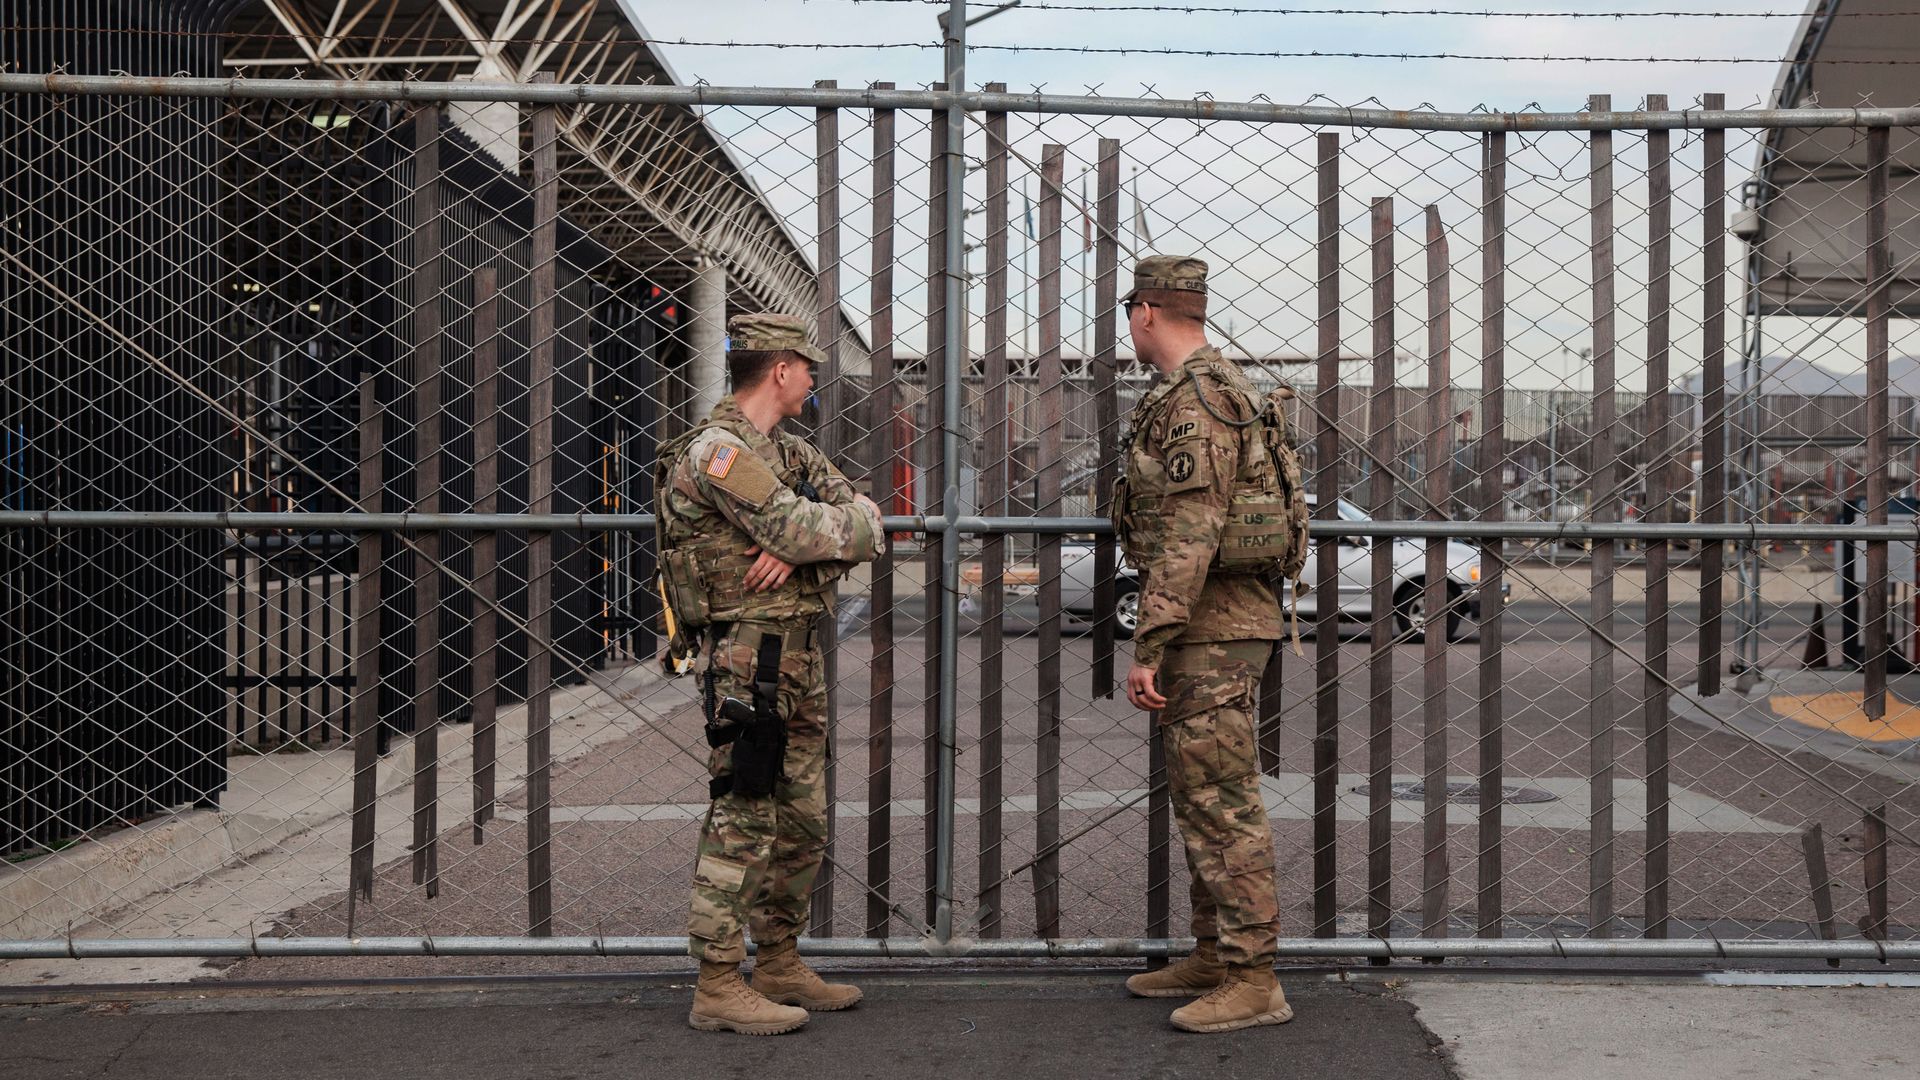 U.S. troops stand at a gate.